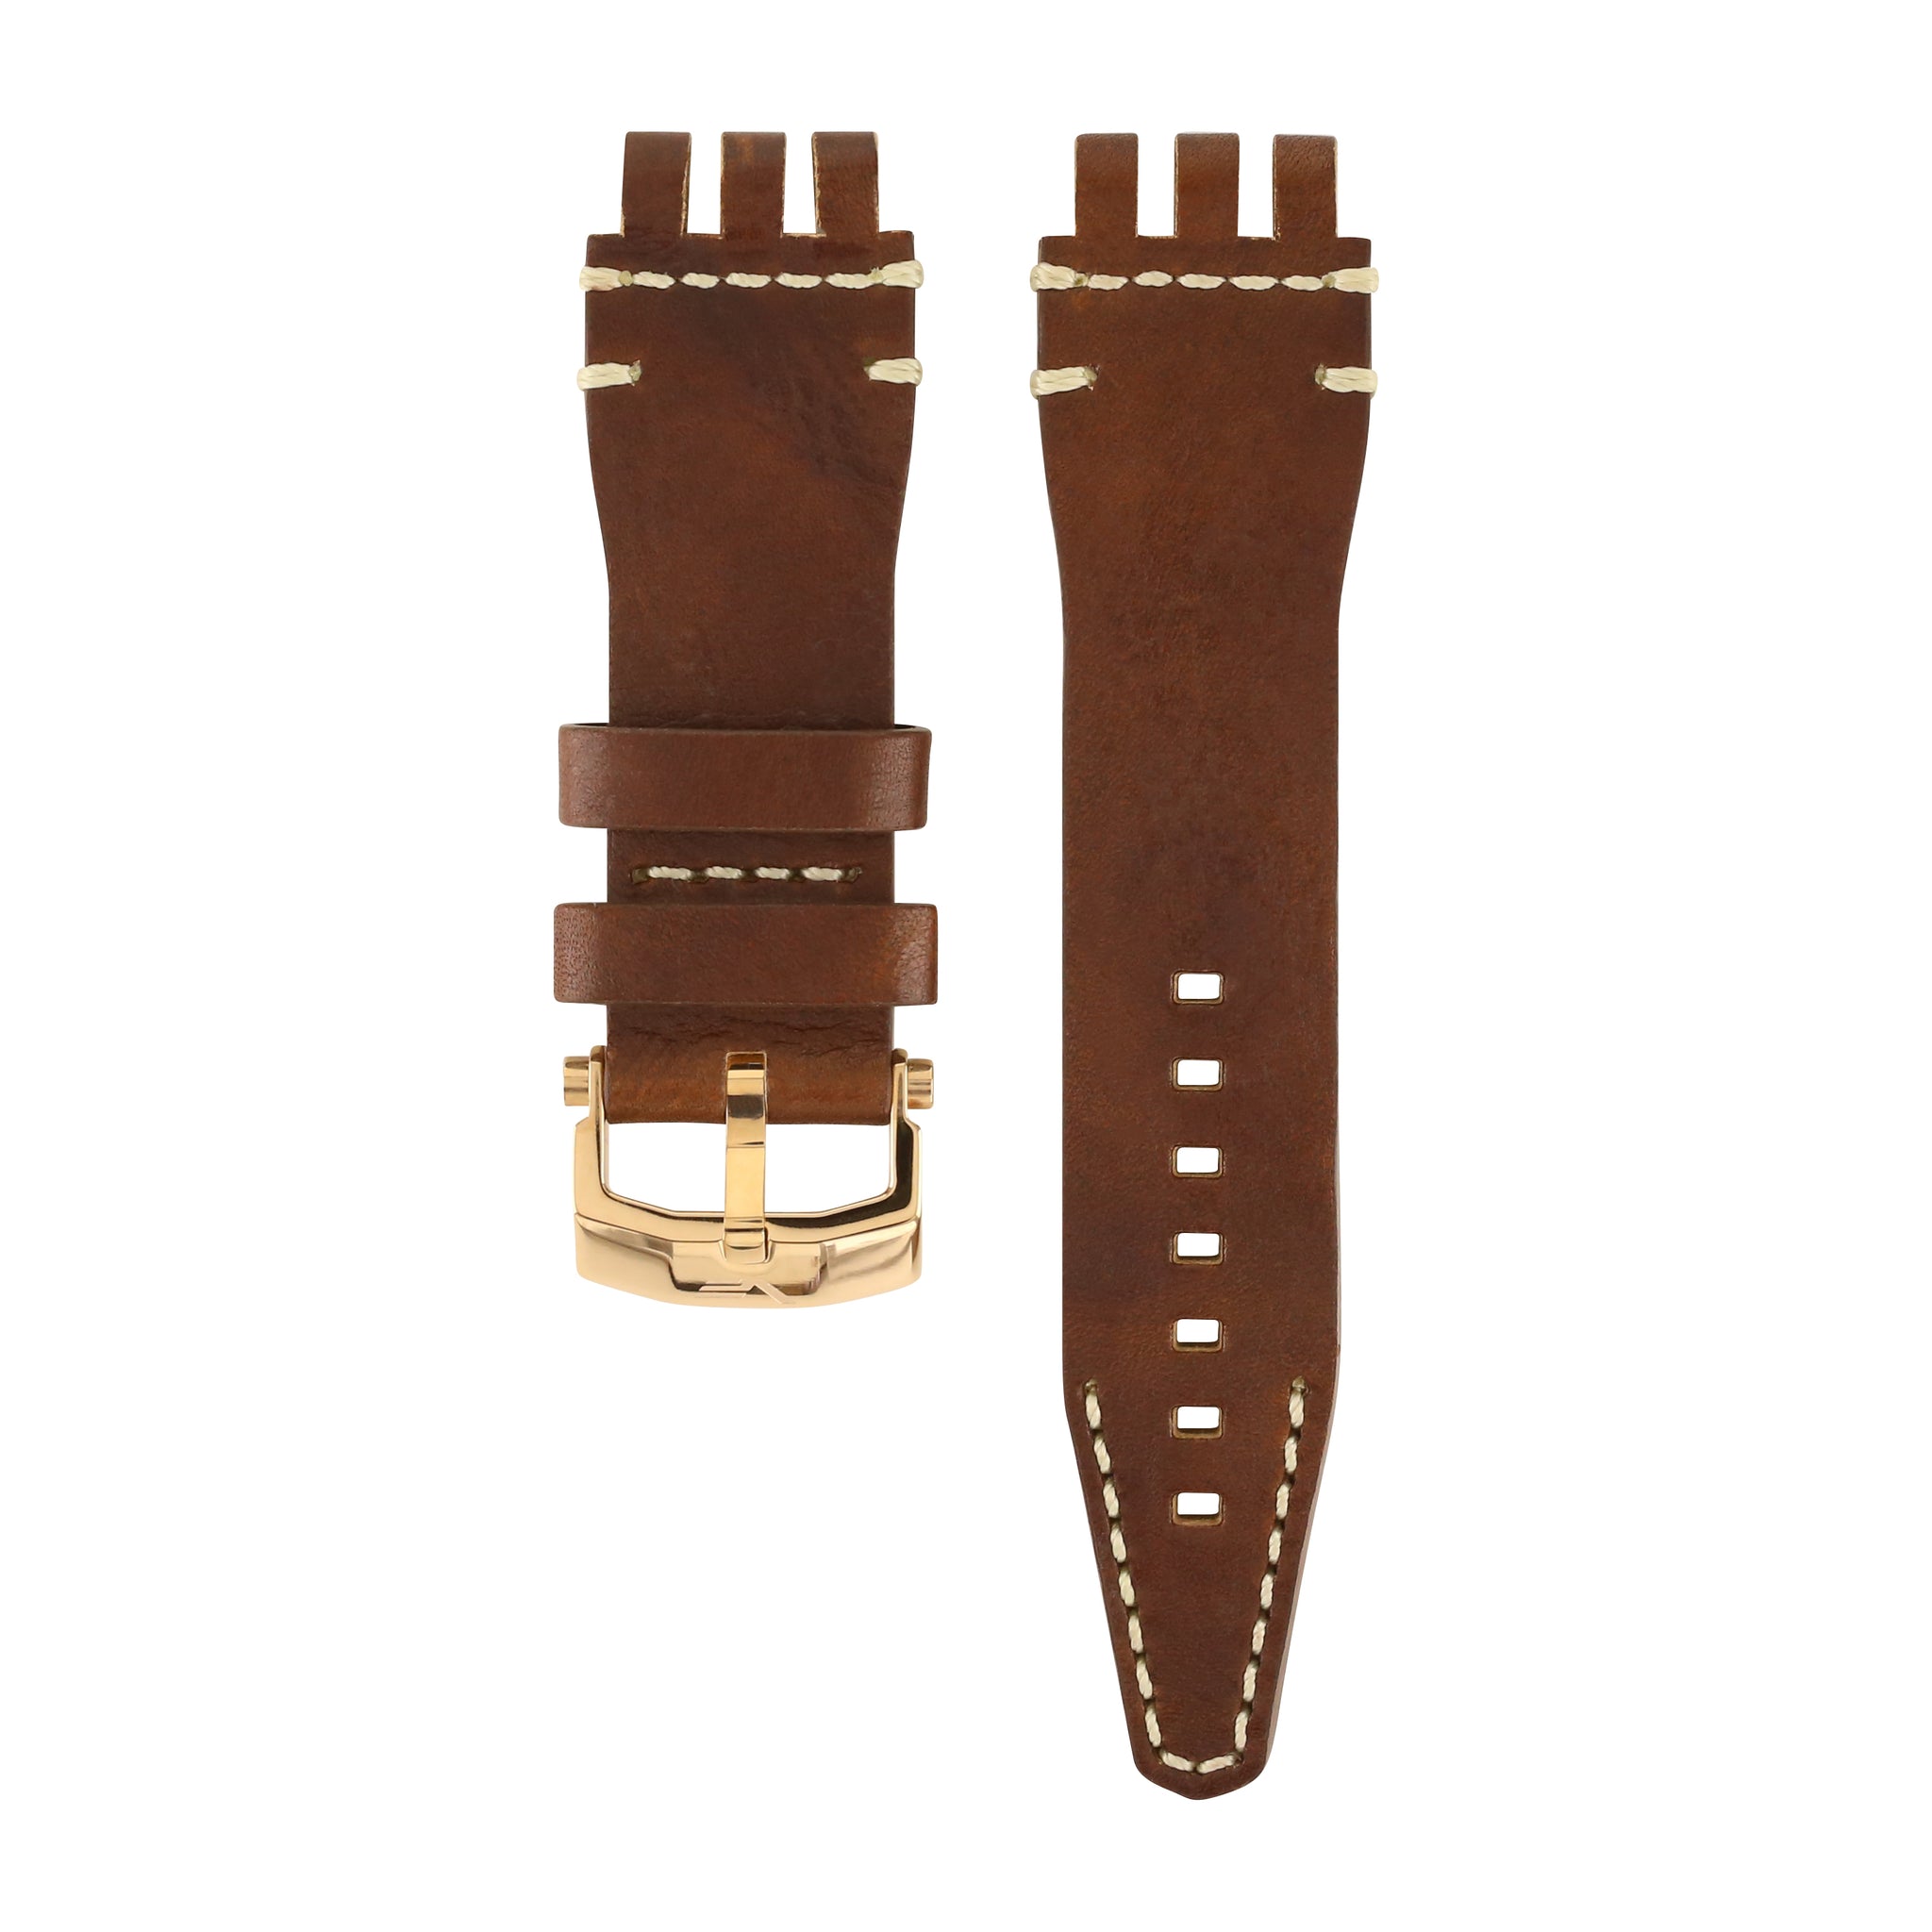 ENERGIA BROWN & BEIGE LEATHER STRAP 26mm - ROSE GOLD BUCKLE